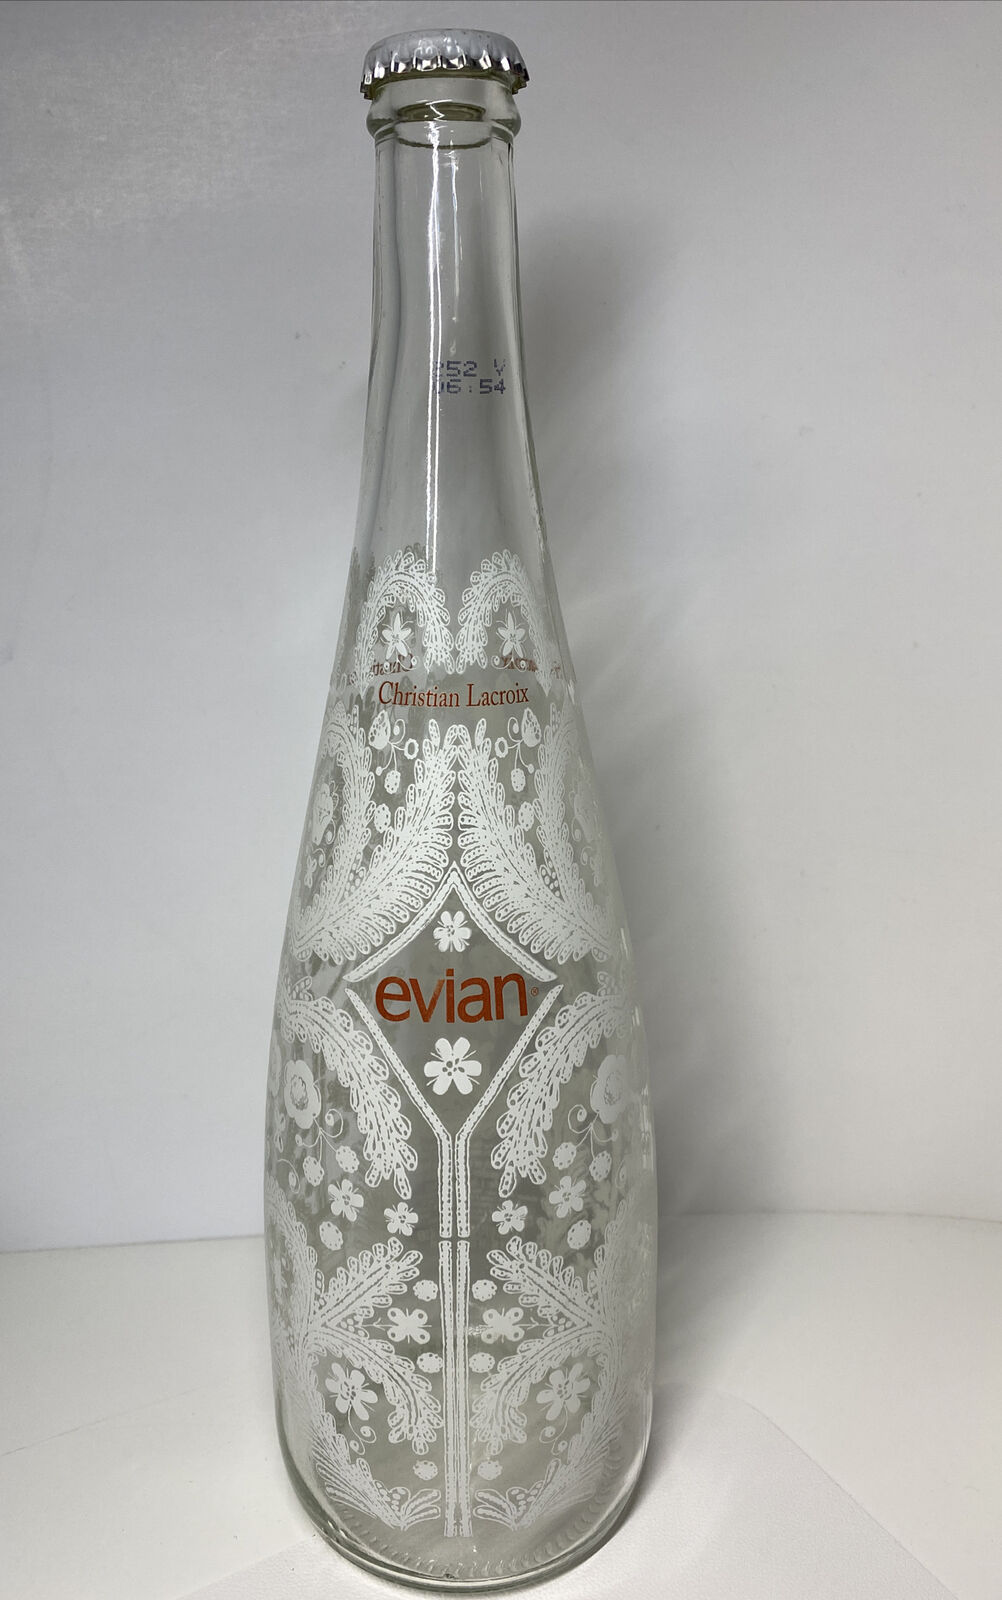 2008 EVIAN Limited Edition CHRISTIAN LACROIX Water Snowflake Bottle